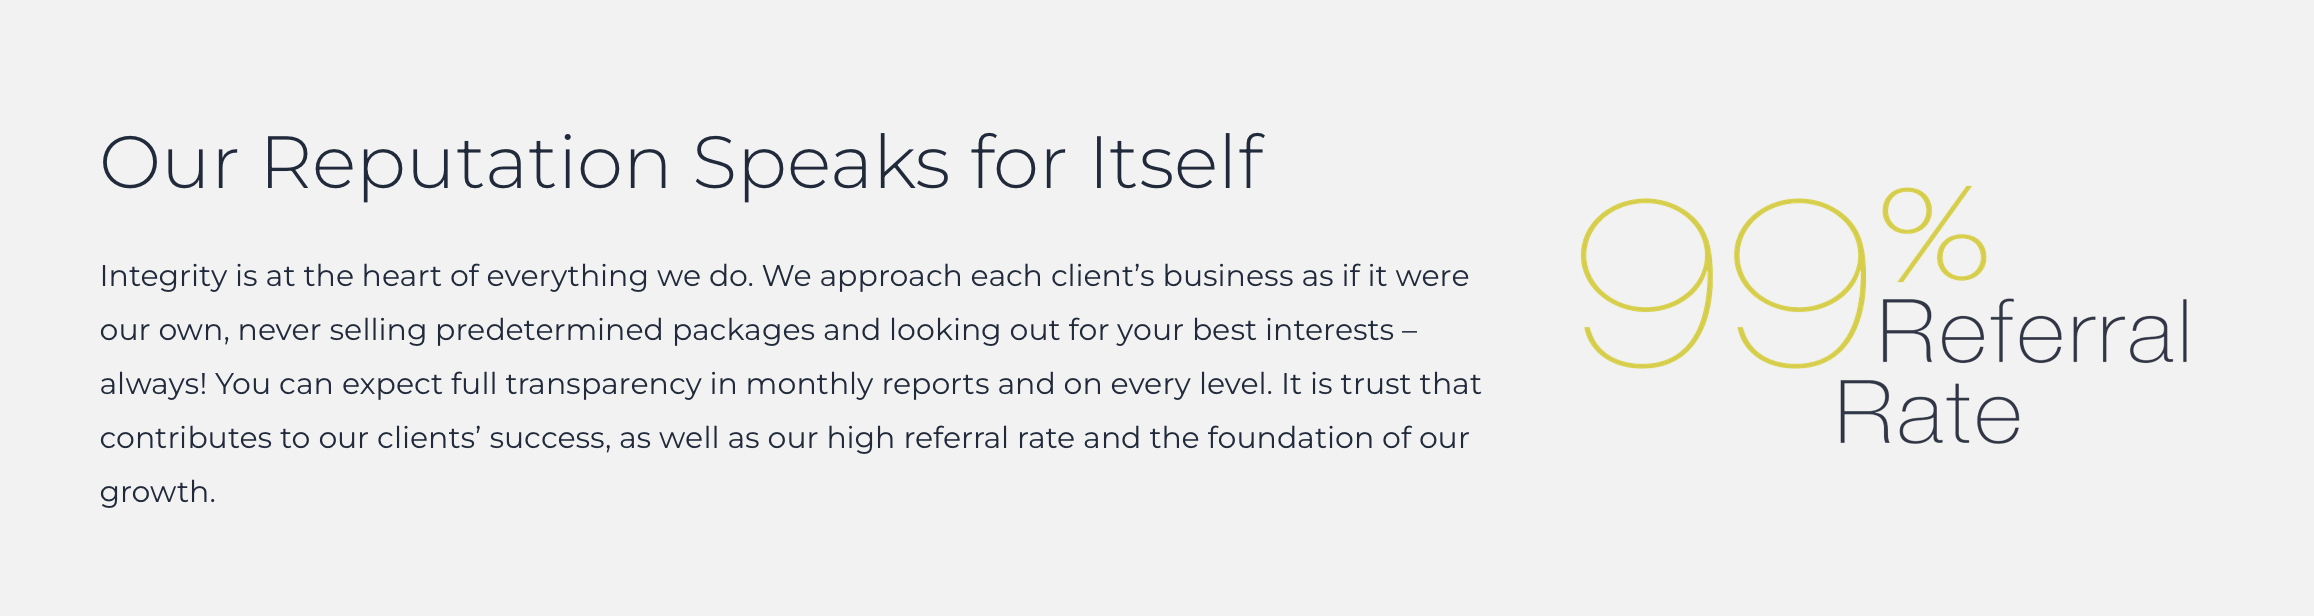 Founded on integrity, transparency, and candidness to share our expertise, we build a rapport with our clients from day one. It's our honesty  and open communication that builds trust and long-term relationships that manifest our 99% referral rate and a reputation for reliability and high-performance.